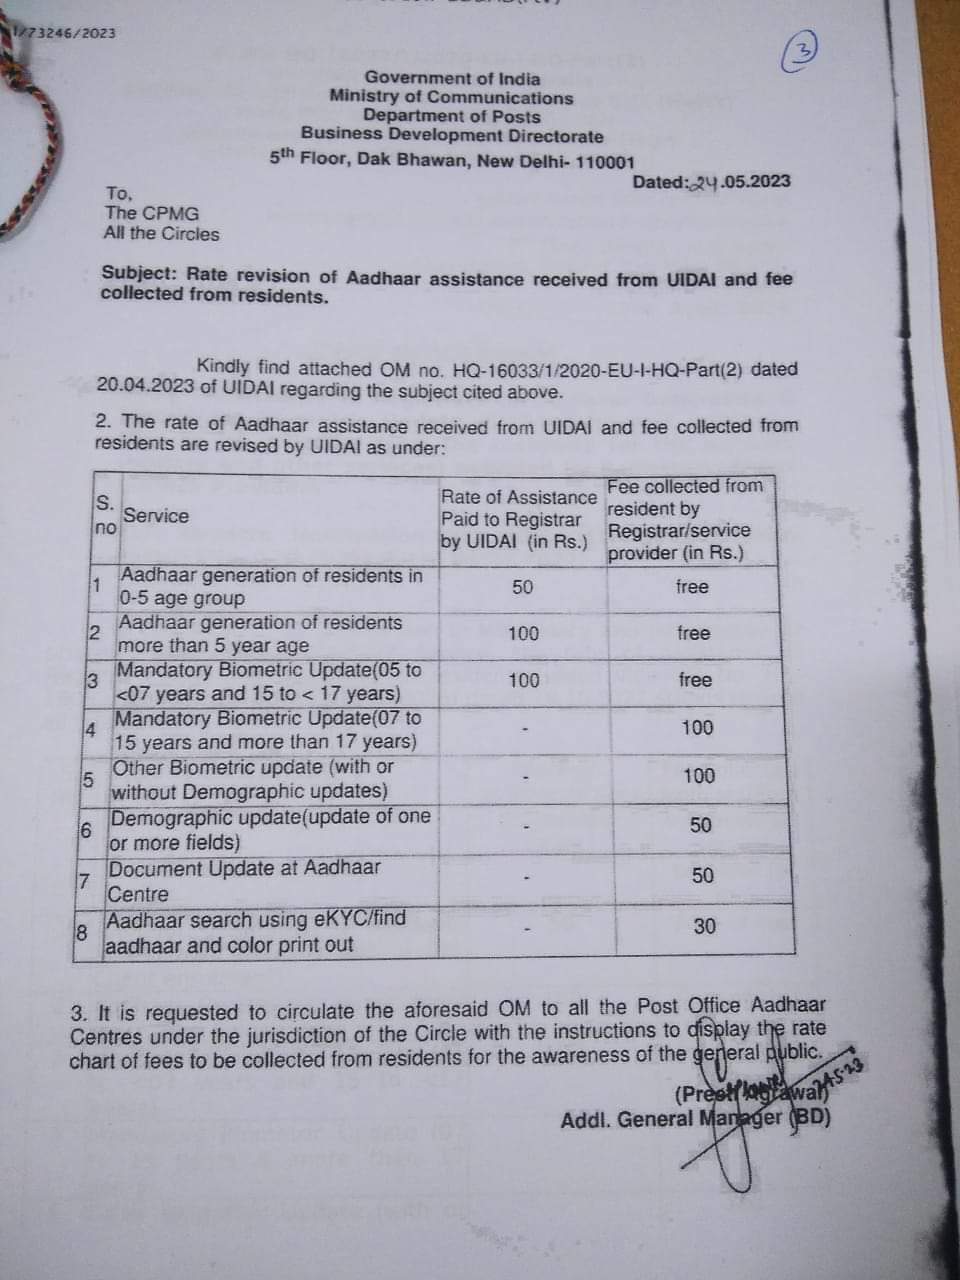 Revised Rate of Aadhaar assistance by UIDAI and fee collected from residents for Post Office